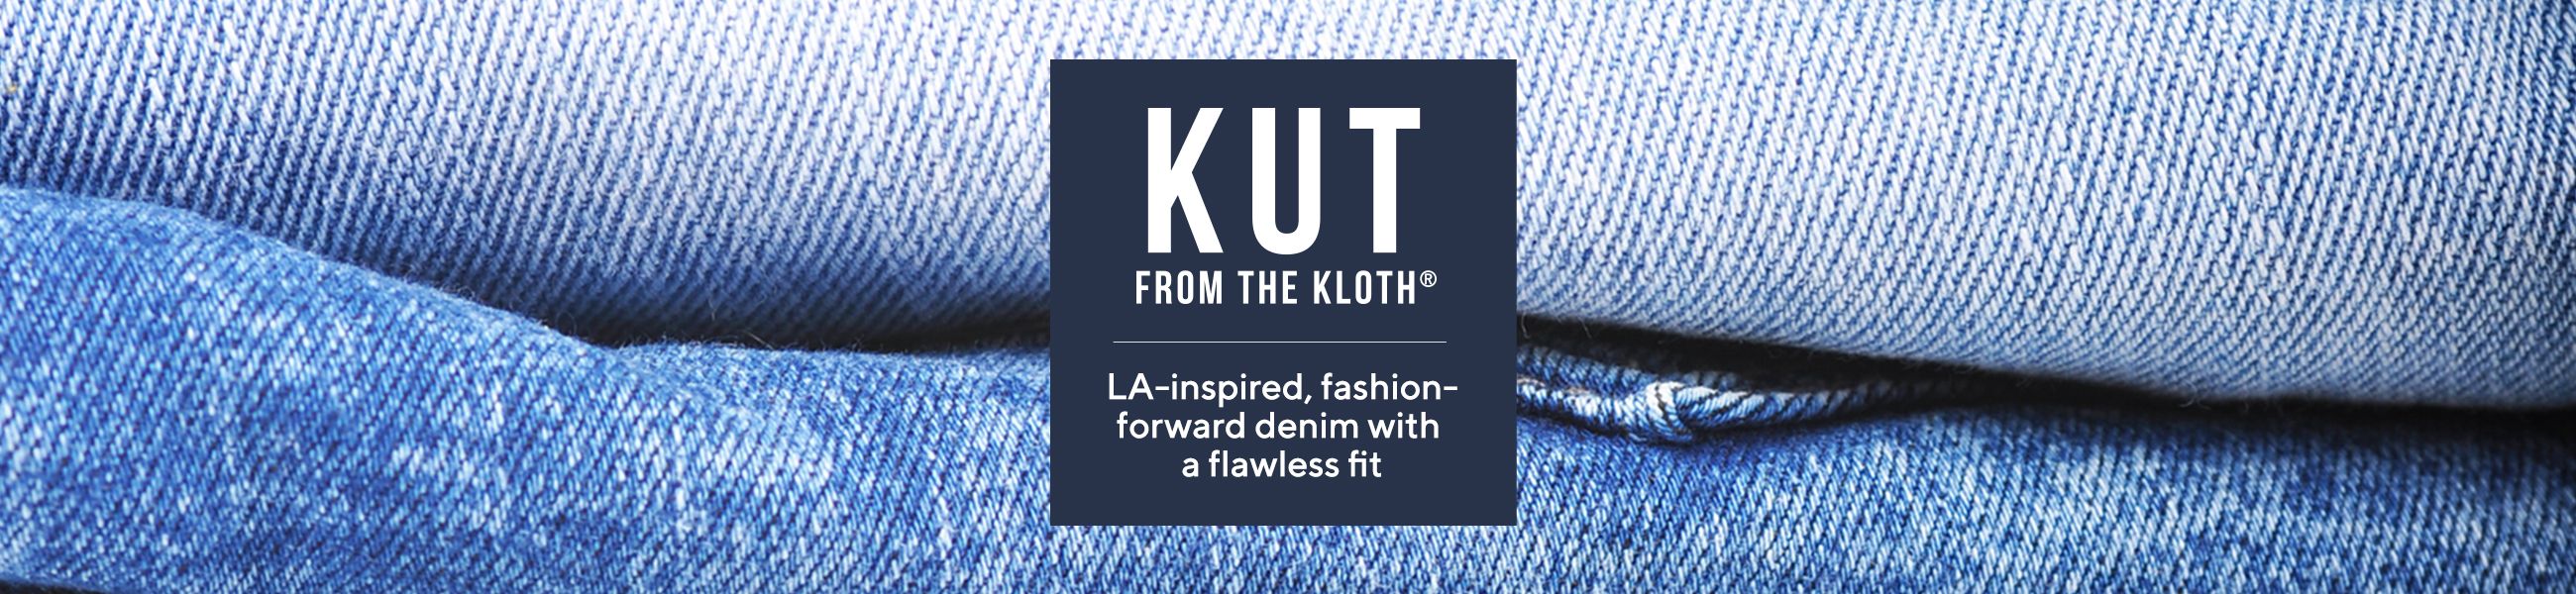 kut from the kloth clothing